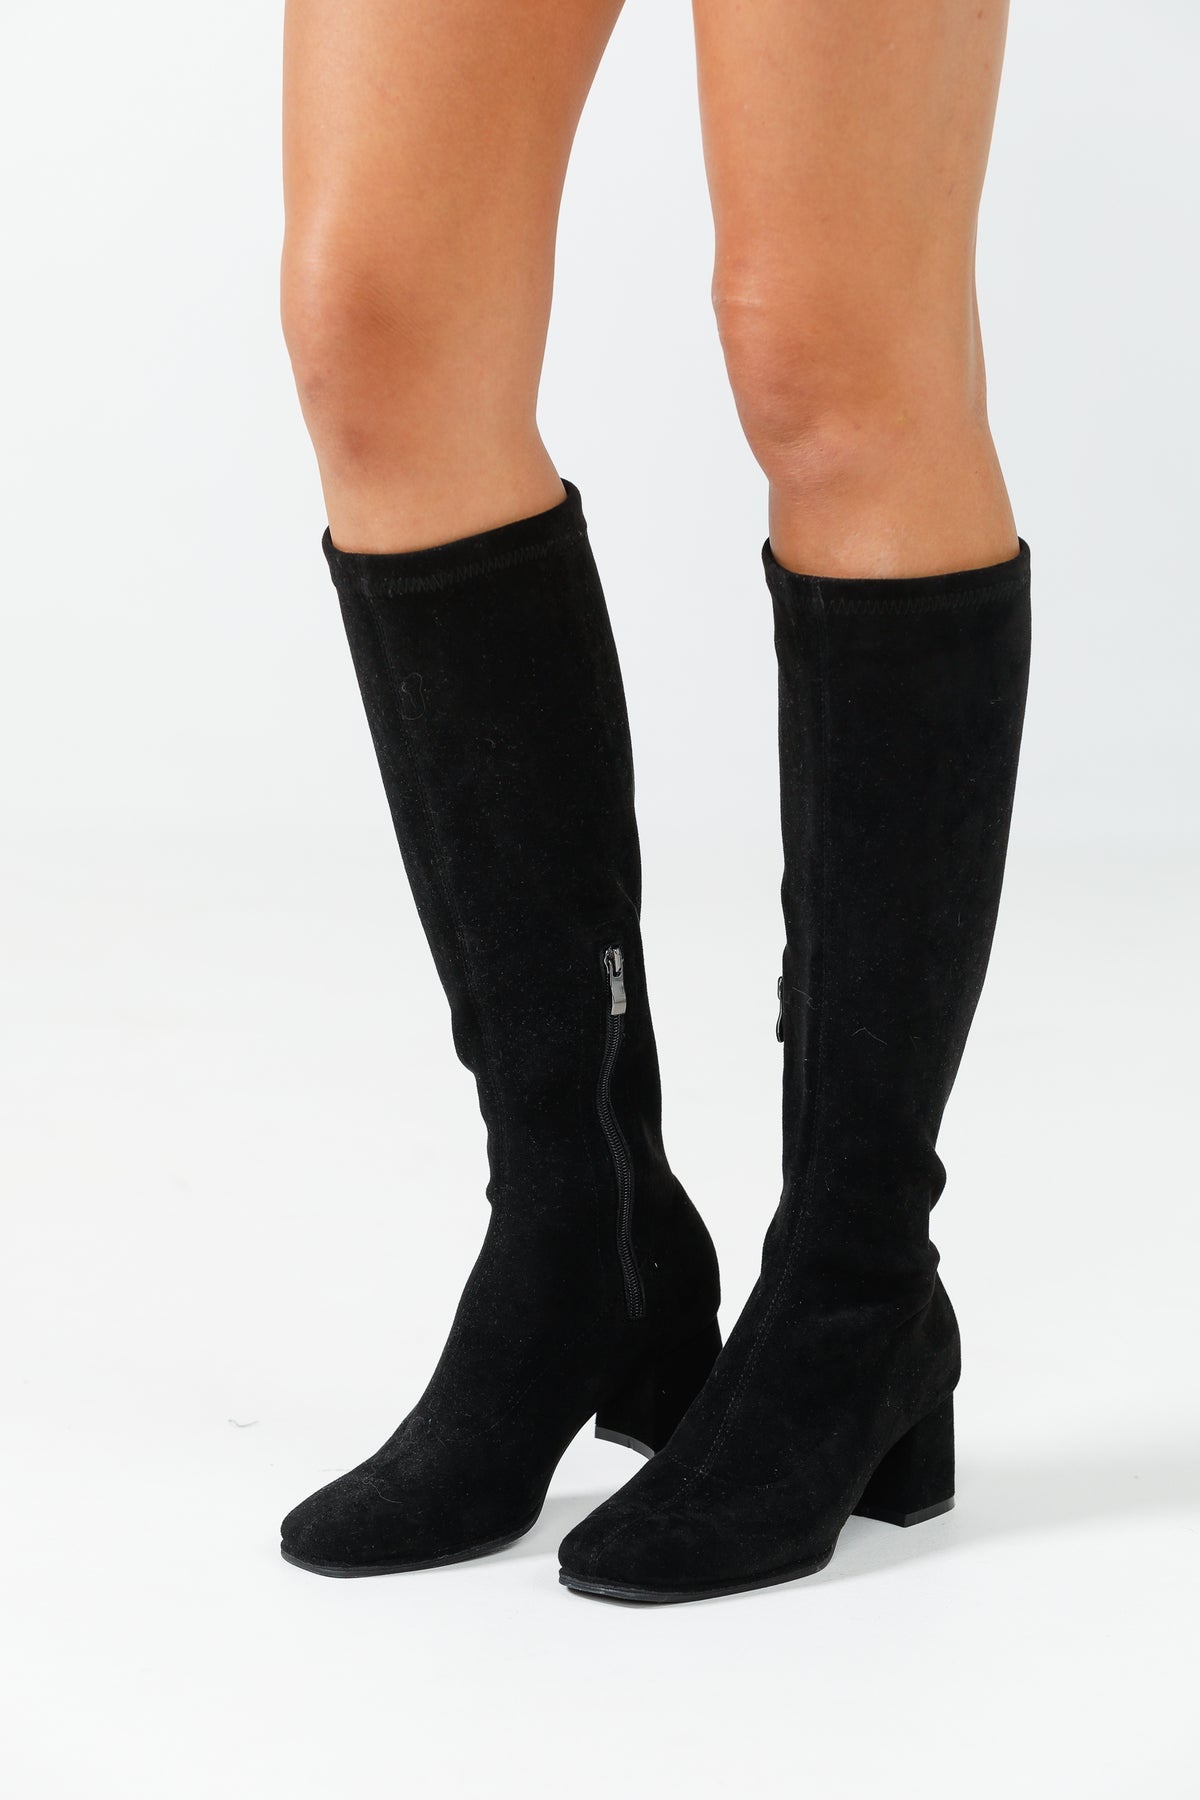 Darcy Boots - Black-Footwear-Holiday-The Bay Room